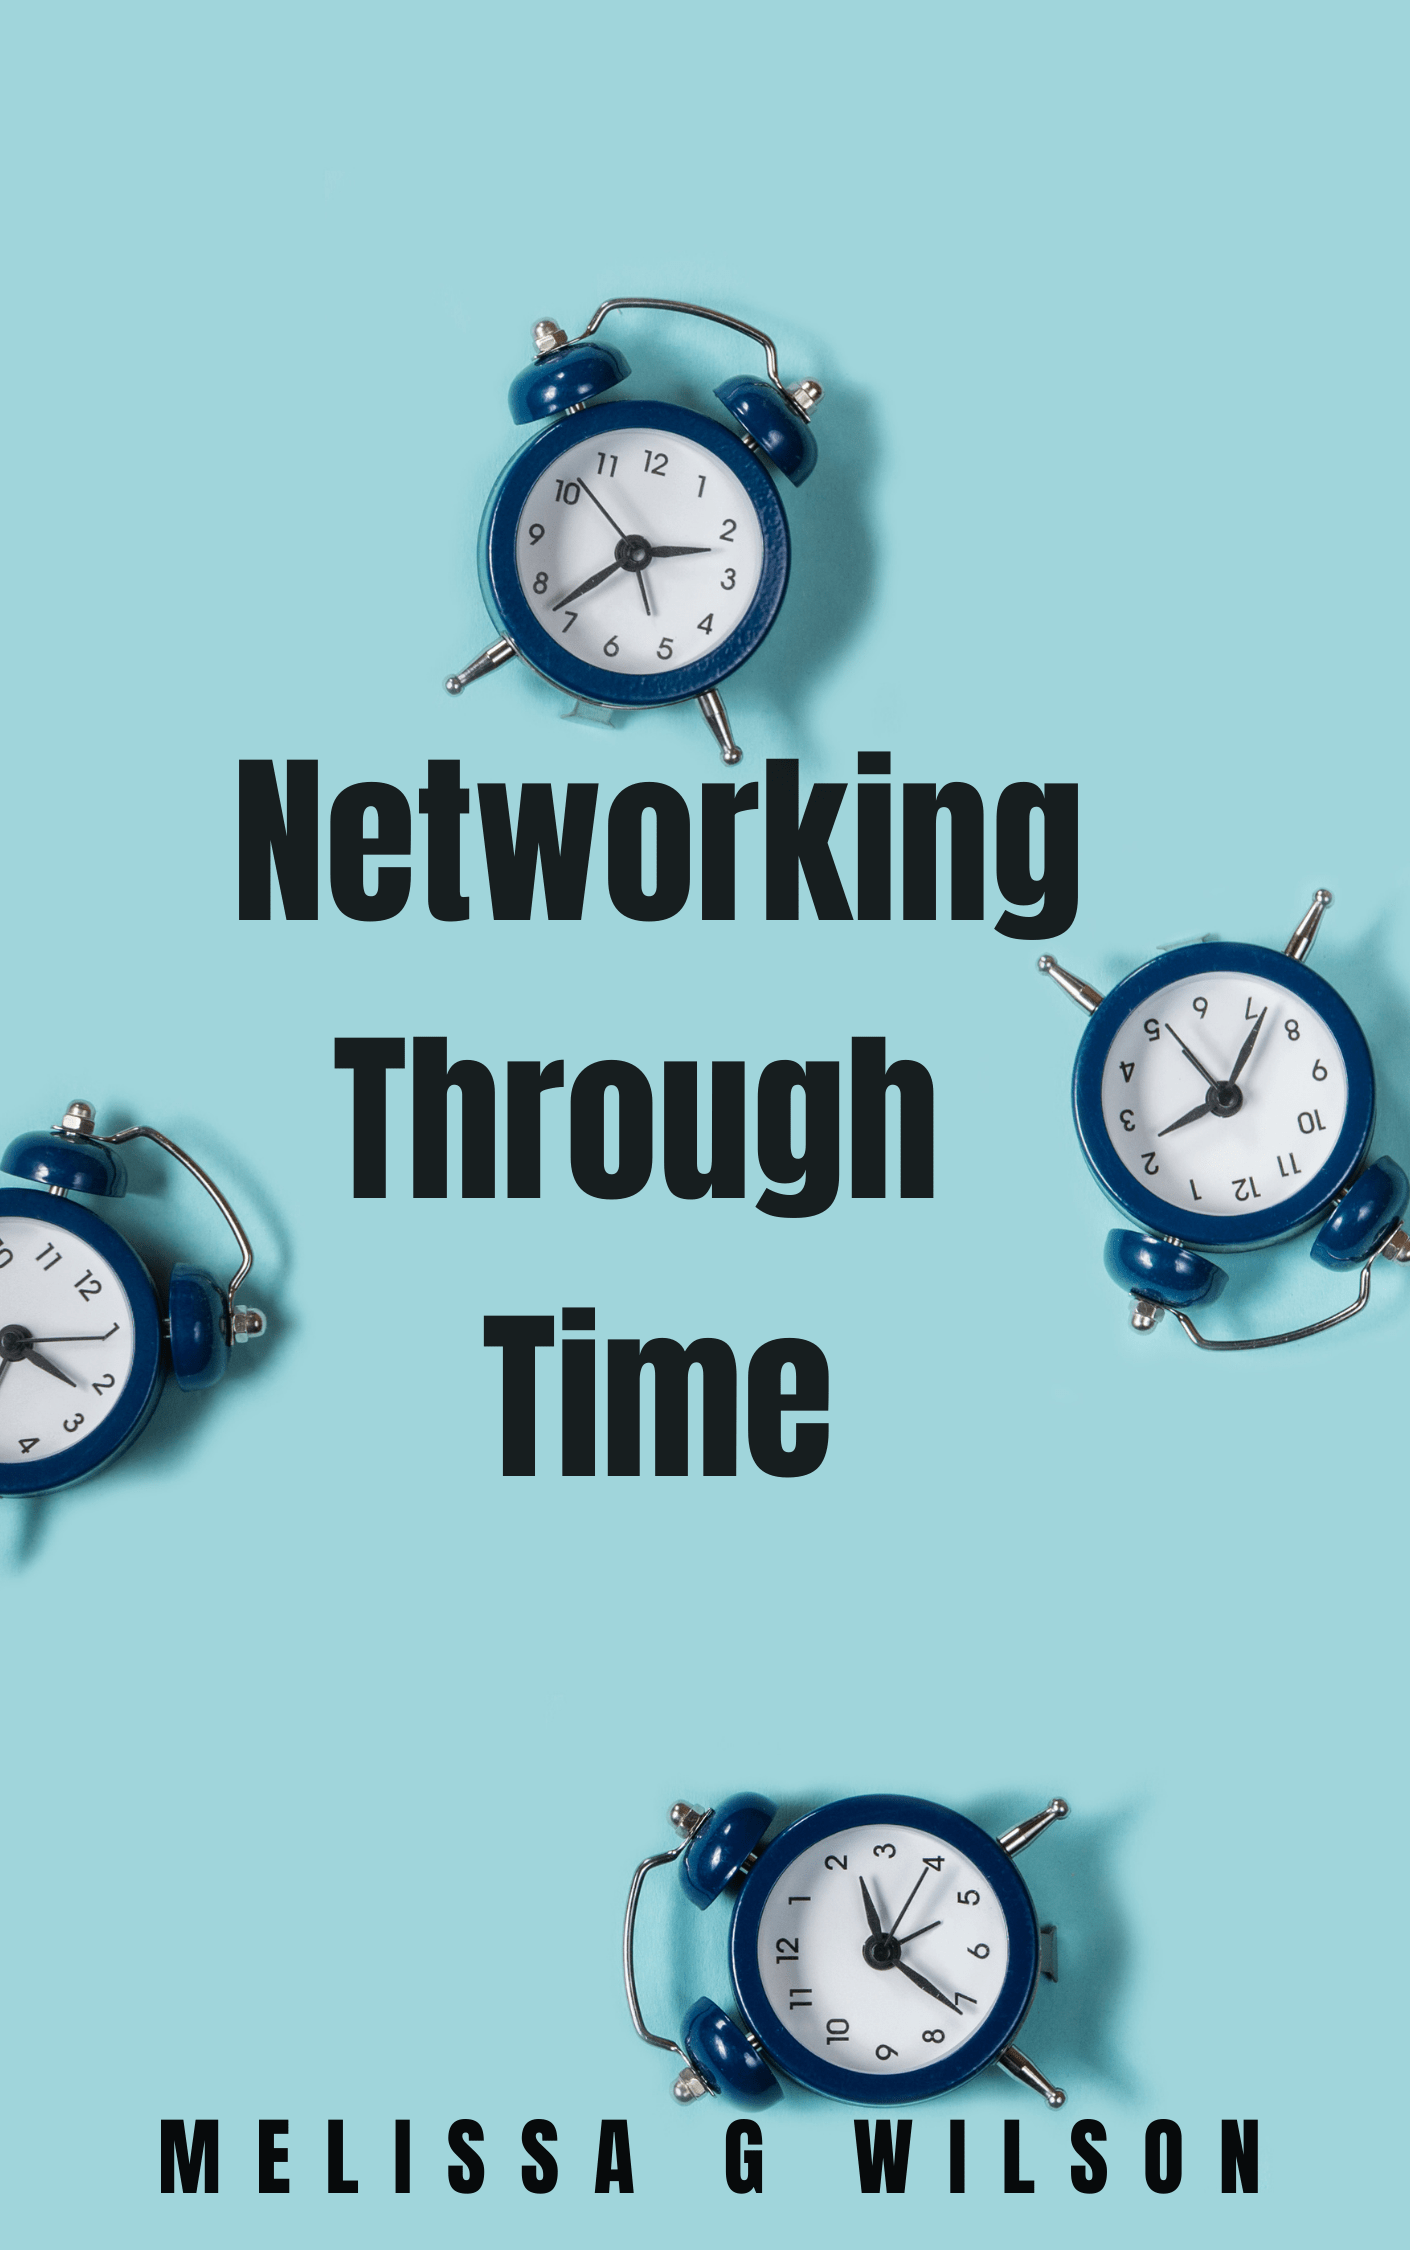 Networking Through Time Book Excerpt: Part 2